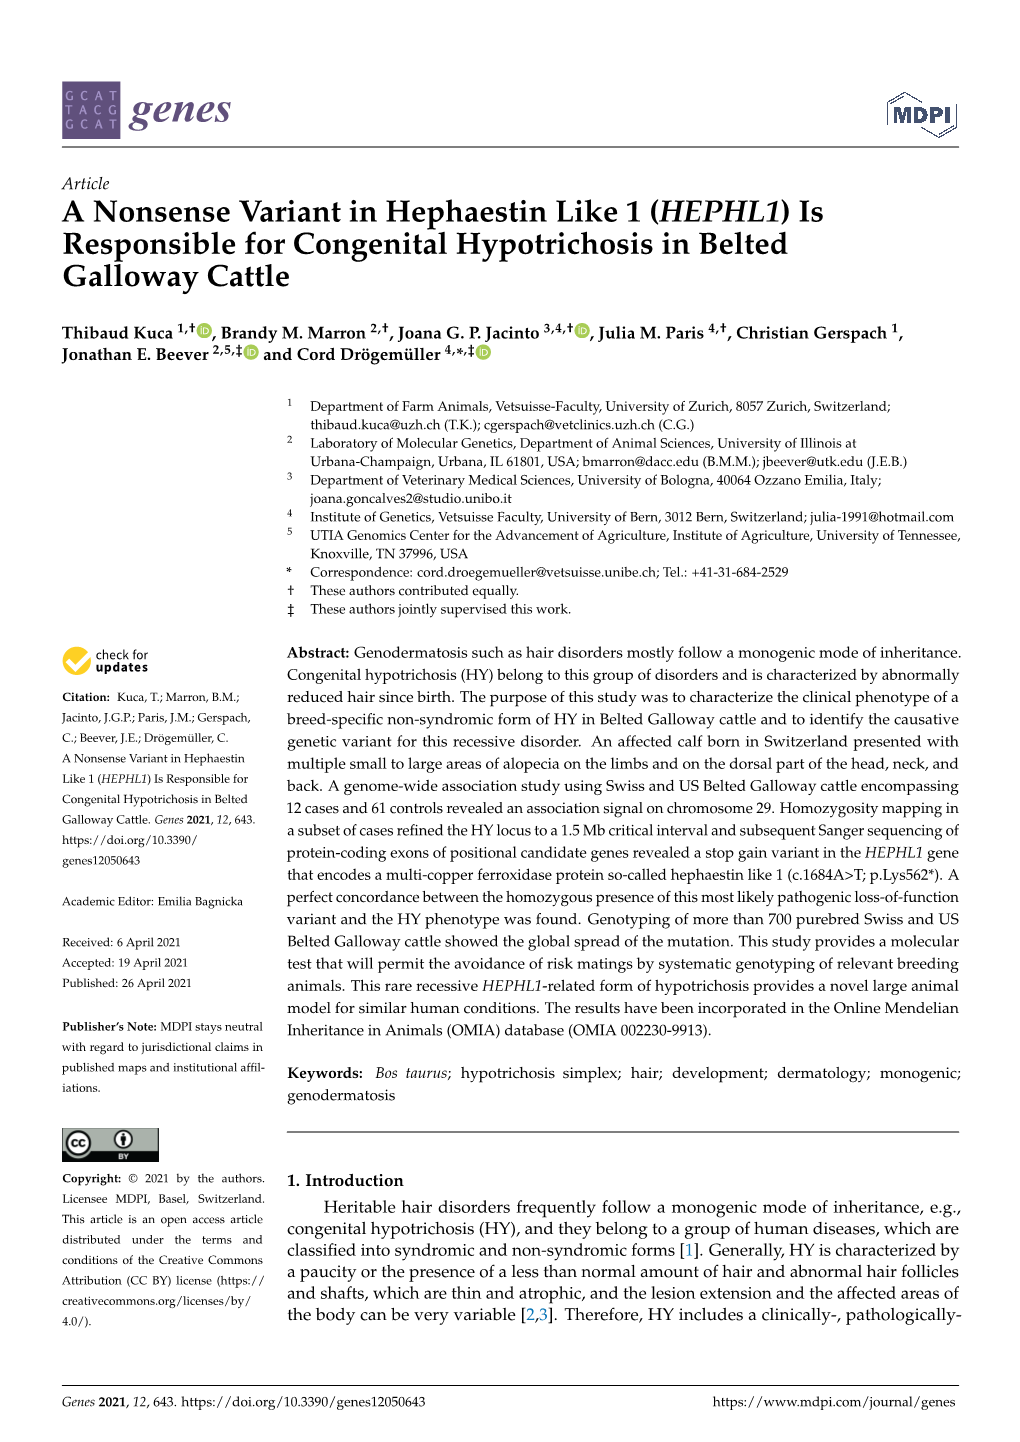 Is Responsible for Congenital Hypotrichosis in Belted Galloway Cattle